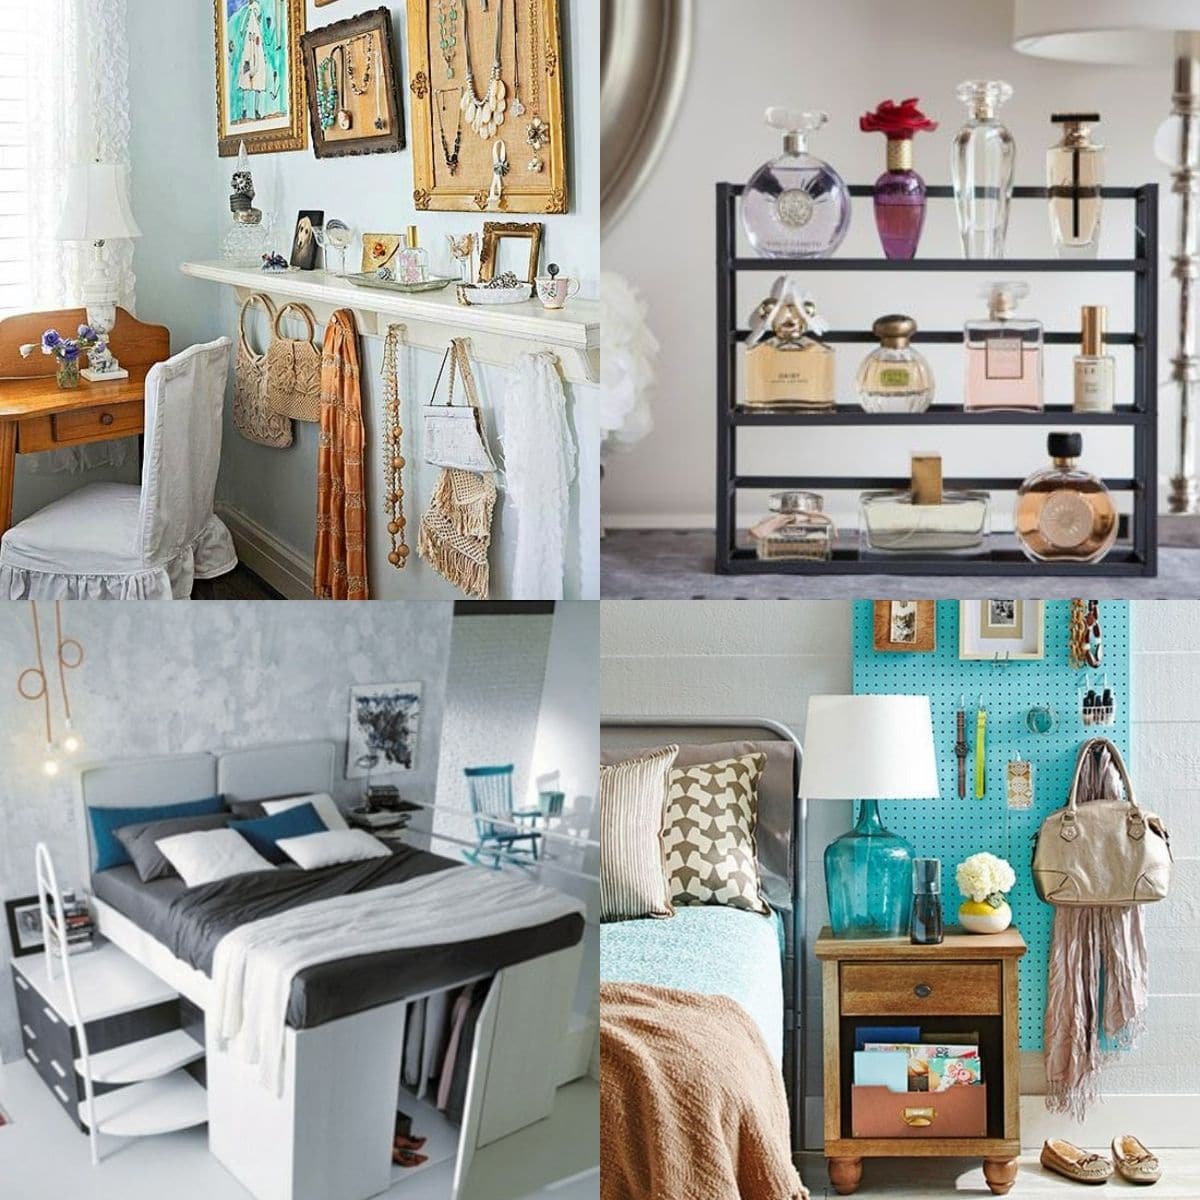 Increase storage in your small rooms with the fun hacks.

Keep your room both organized and stylish. 😉

#Storage #StorageIDeas #StorageSpace #SmallRooms #SmallRoomStorage #SmallRoomStorageIDeas

 LocalInfoForYou.com/362046/small-r…